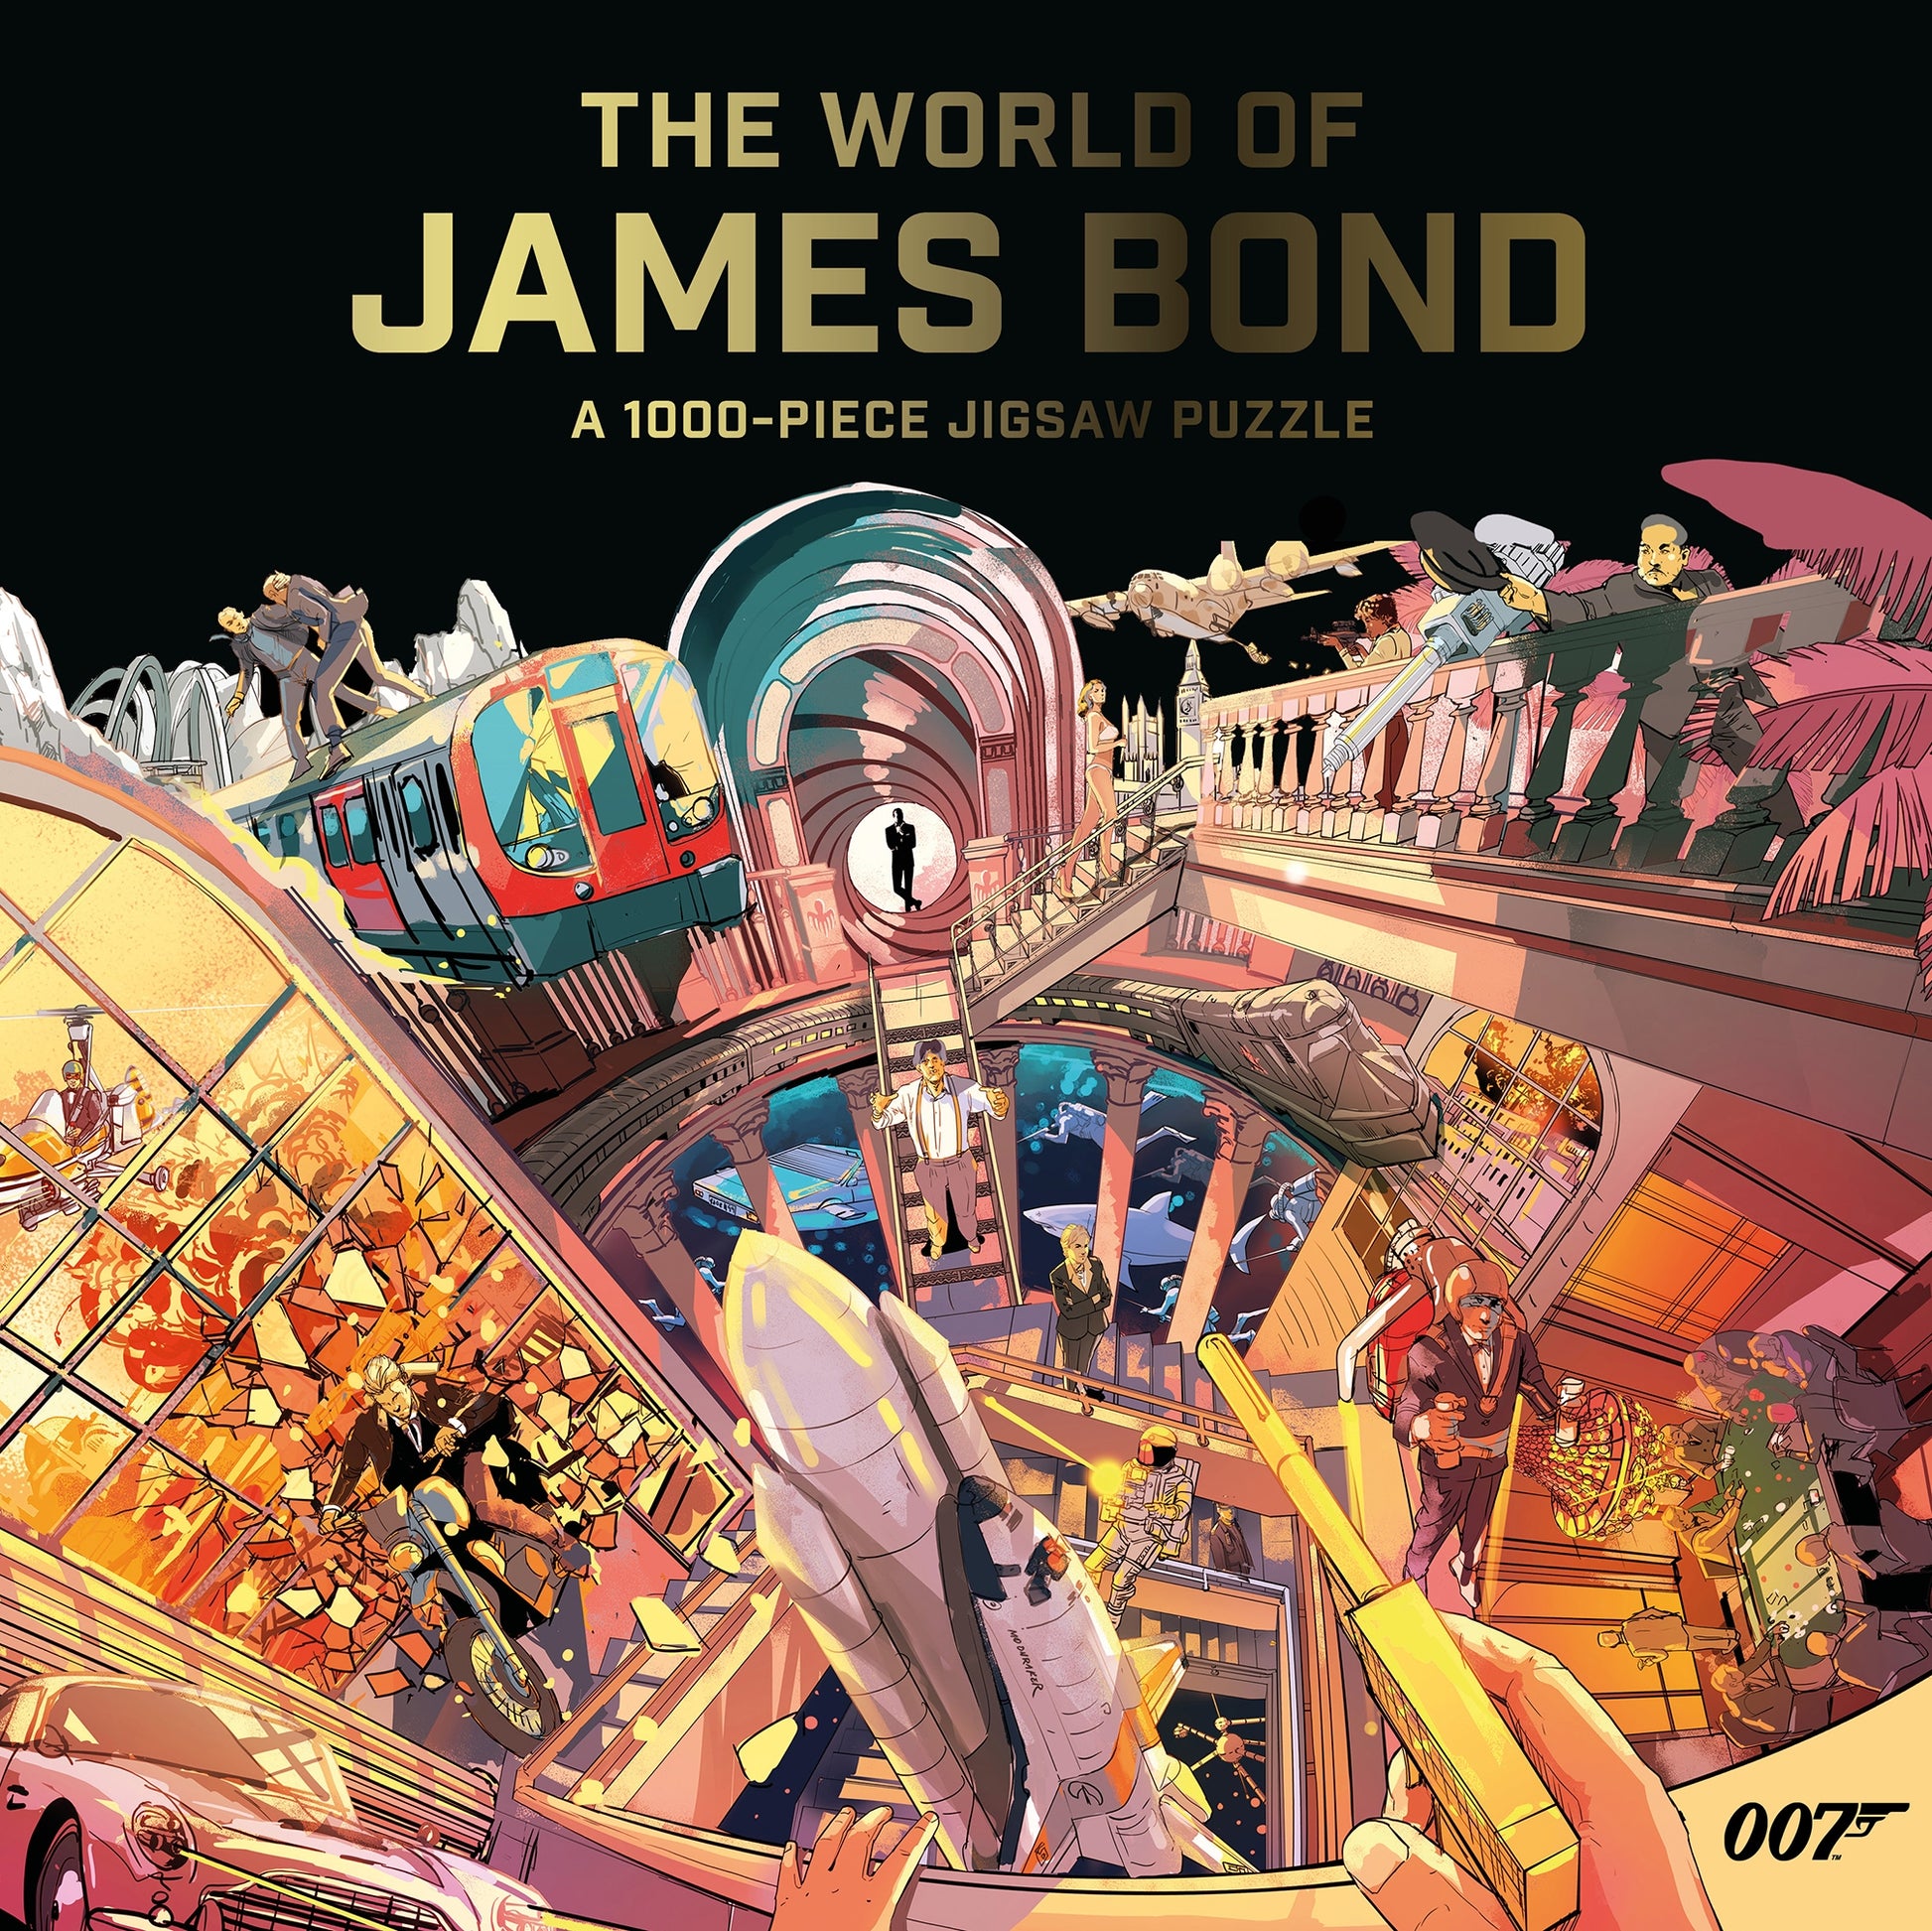 The World of James Bond by Shan Jiang, Laurence King Publishing